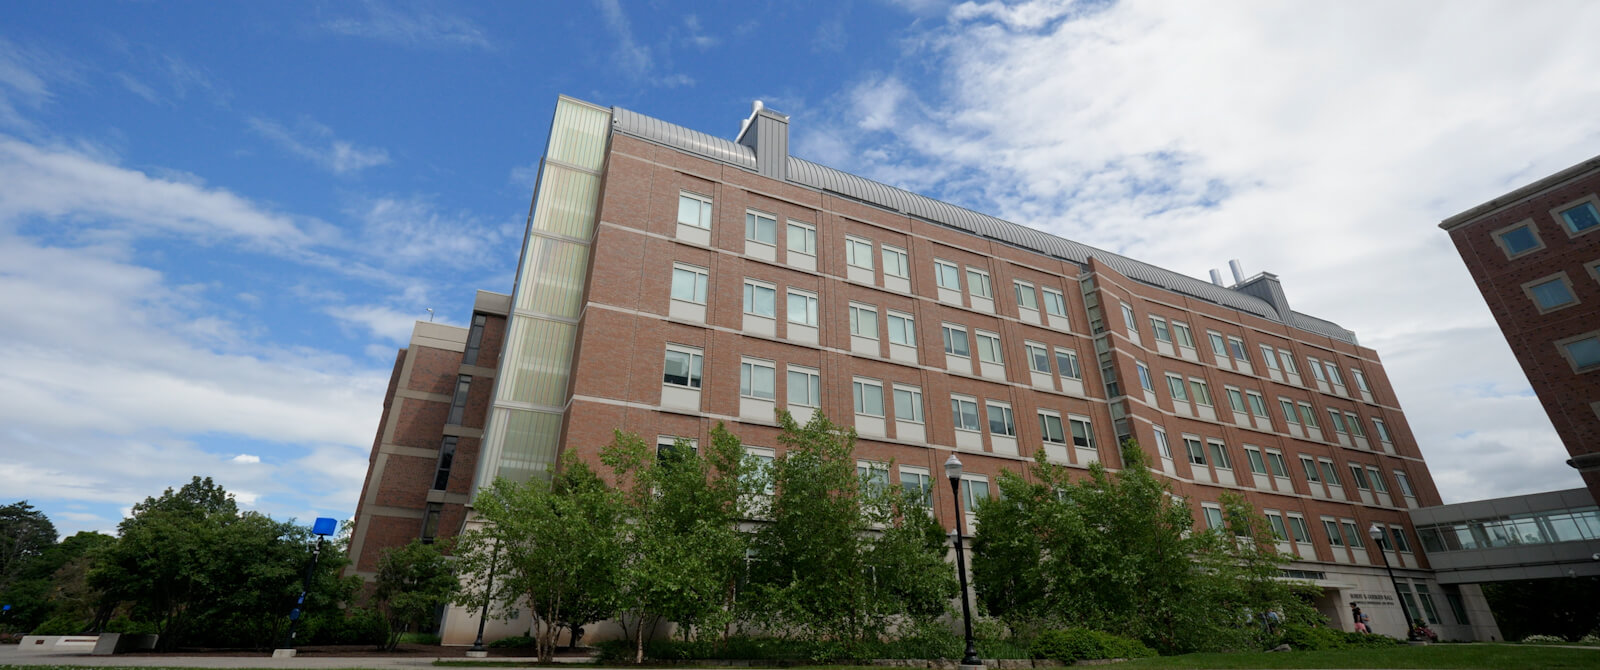 The four-stories of Hajim building stands in front of a beautiful blue sky.